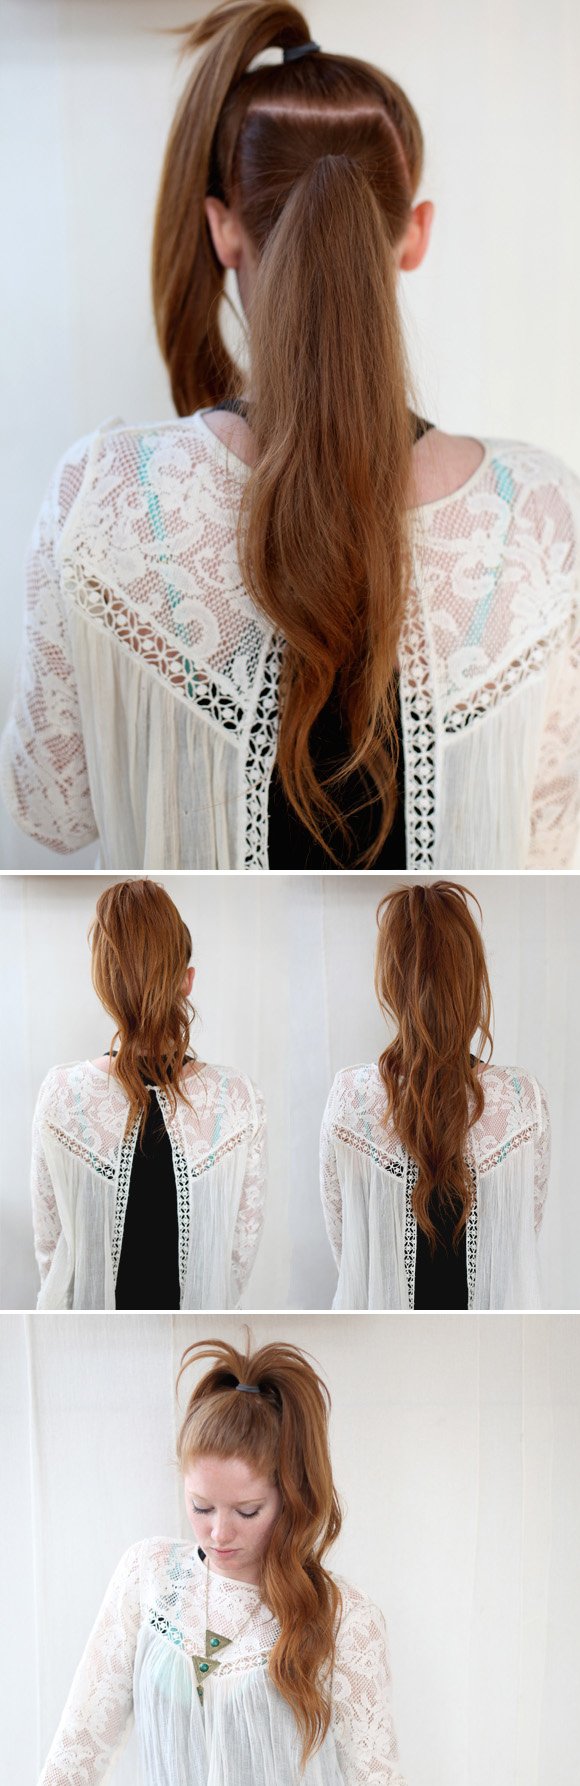 23 Gorgeous Hairstyle Ideas and Tutorials that can be done in 10 minutes  (15)